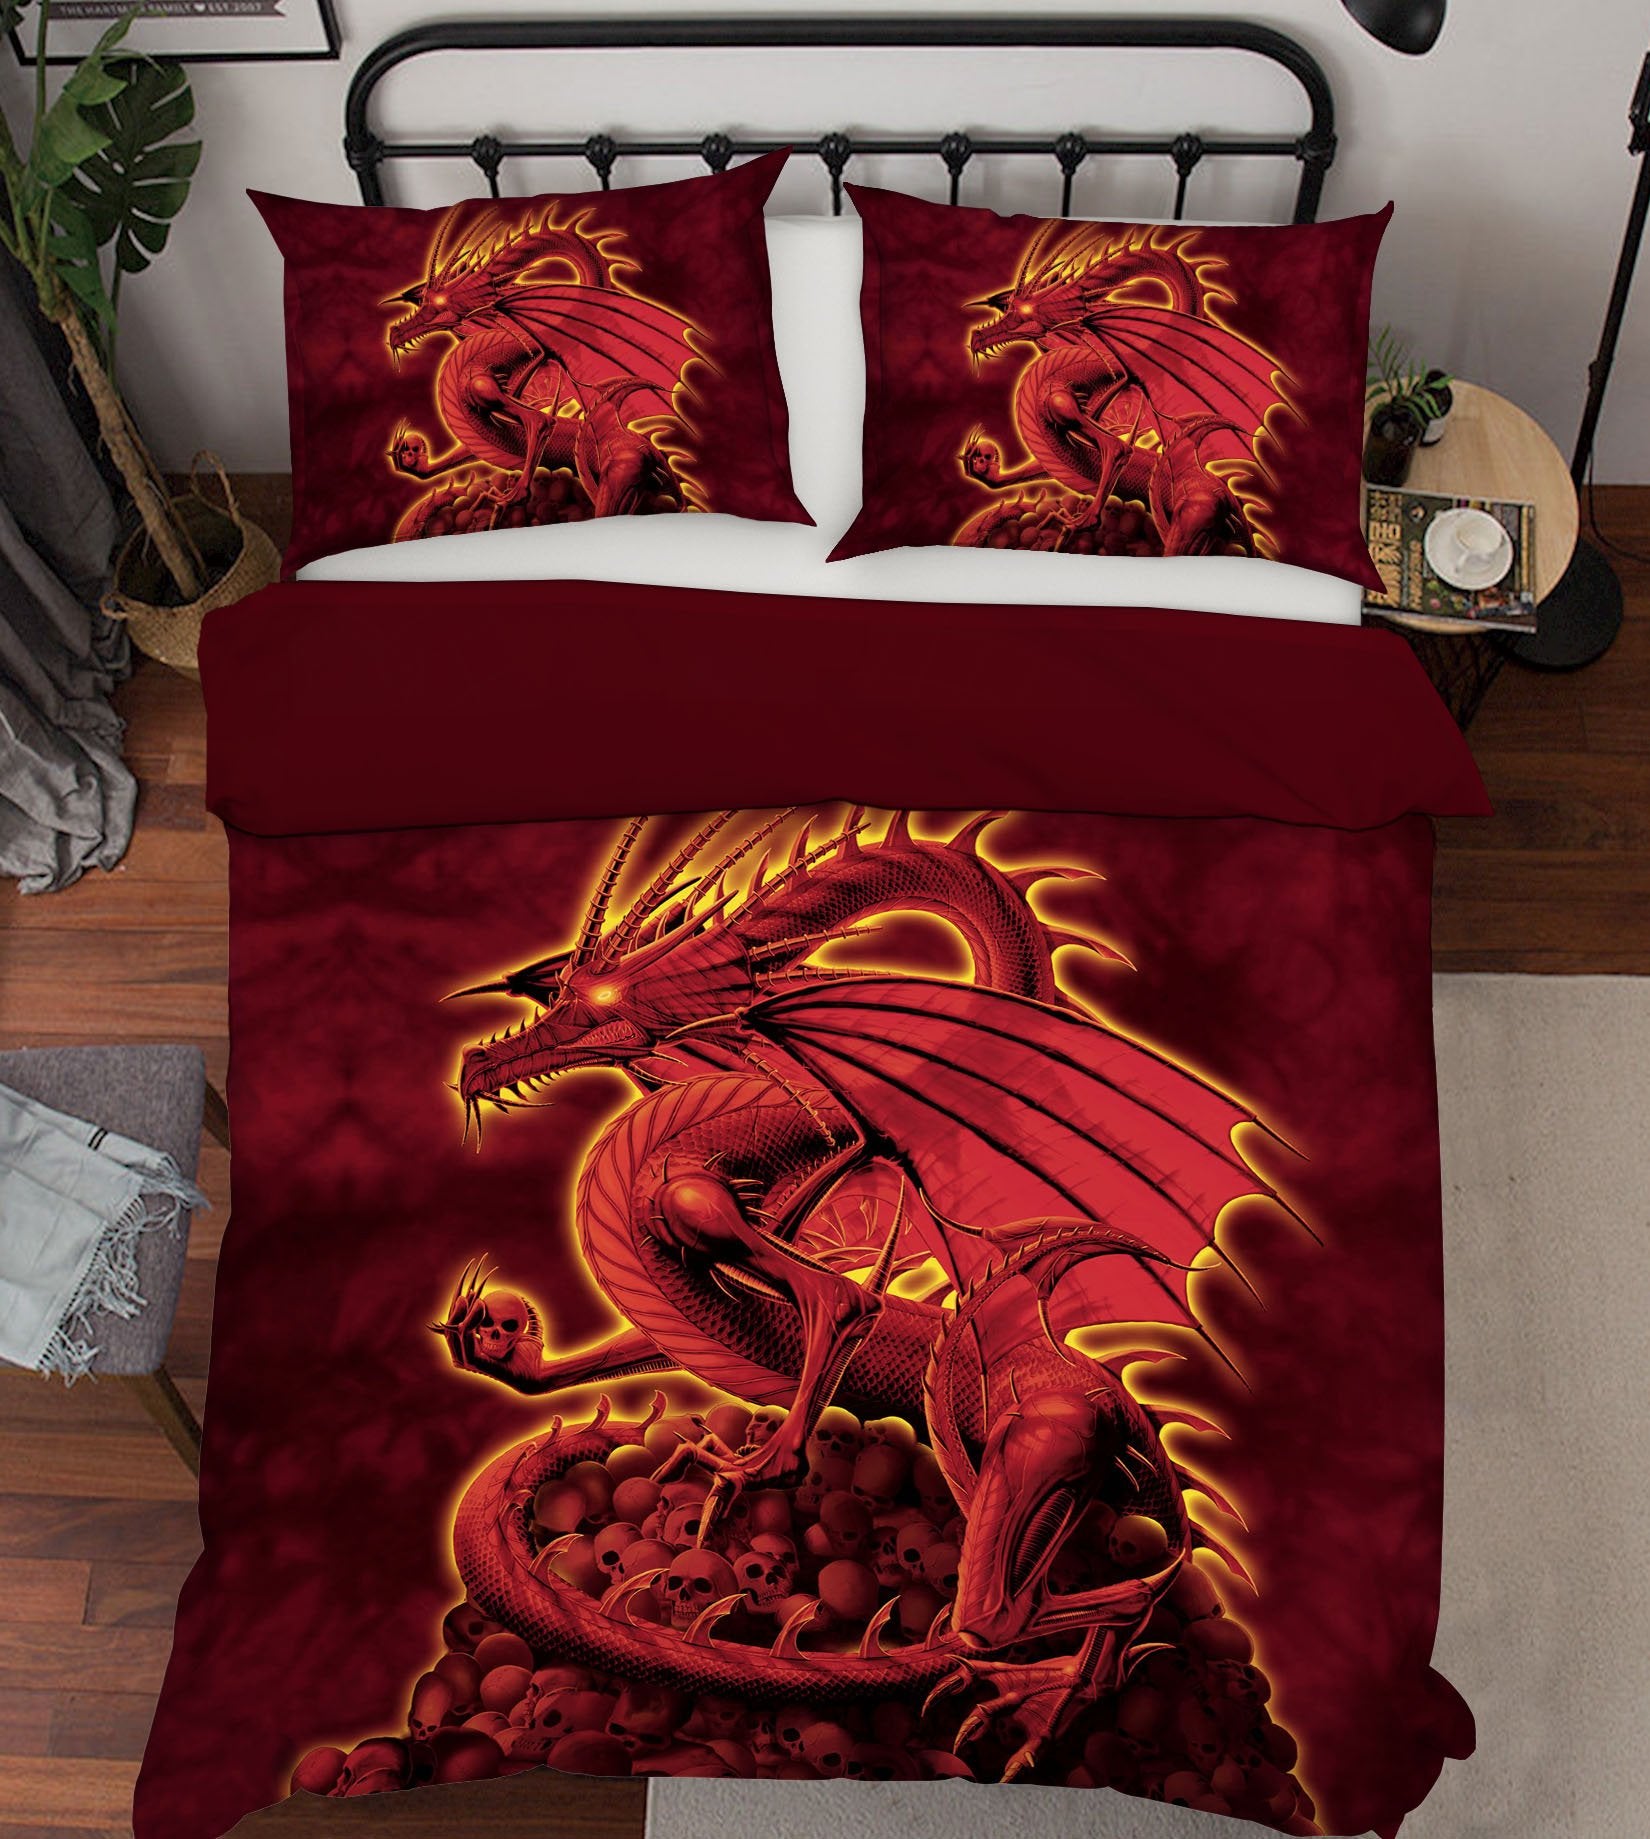 3D Abolisher Red Version 2106 Bed Pillowcases Quilt Exclusive Designer Vincent Quiet Covers AJ Creativity Home 